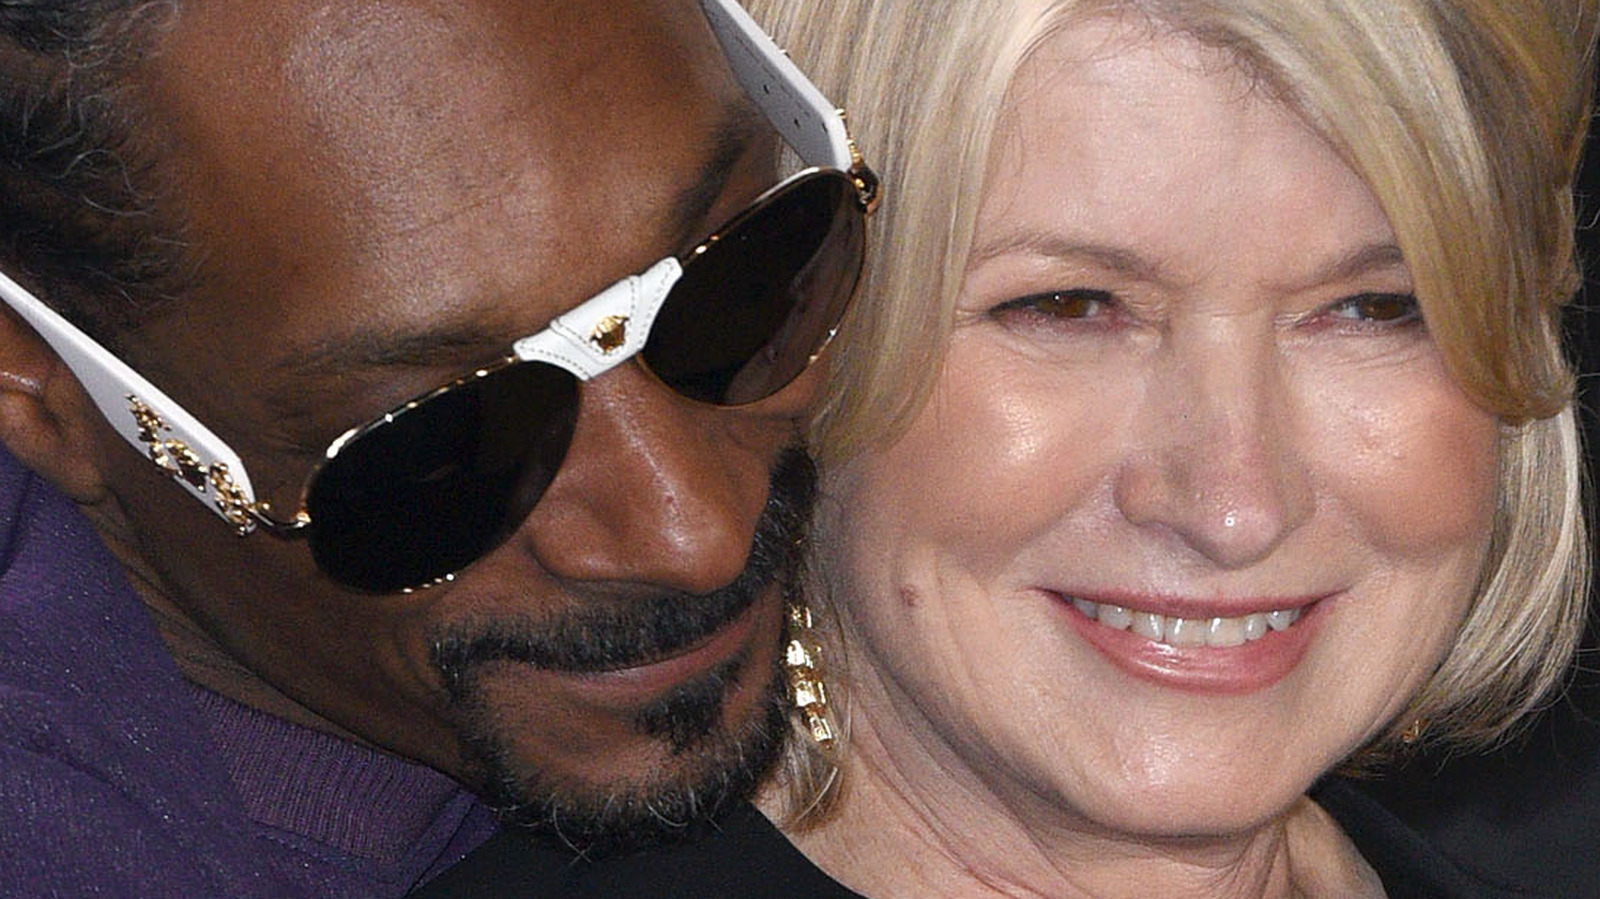 Martha Stewart Went Full Breakfast at Tiffany's With Her Latest